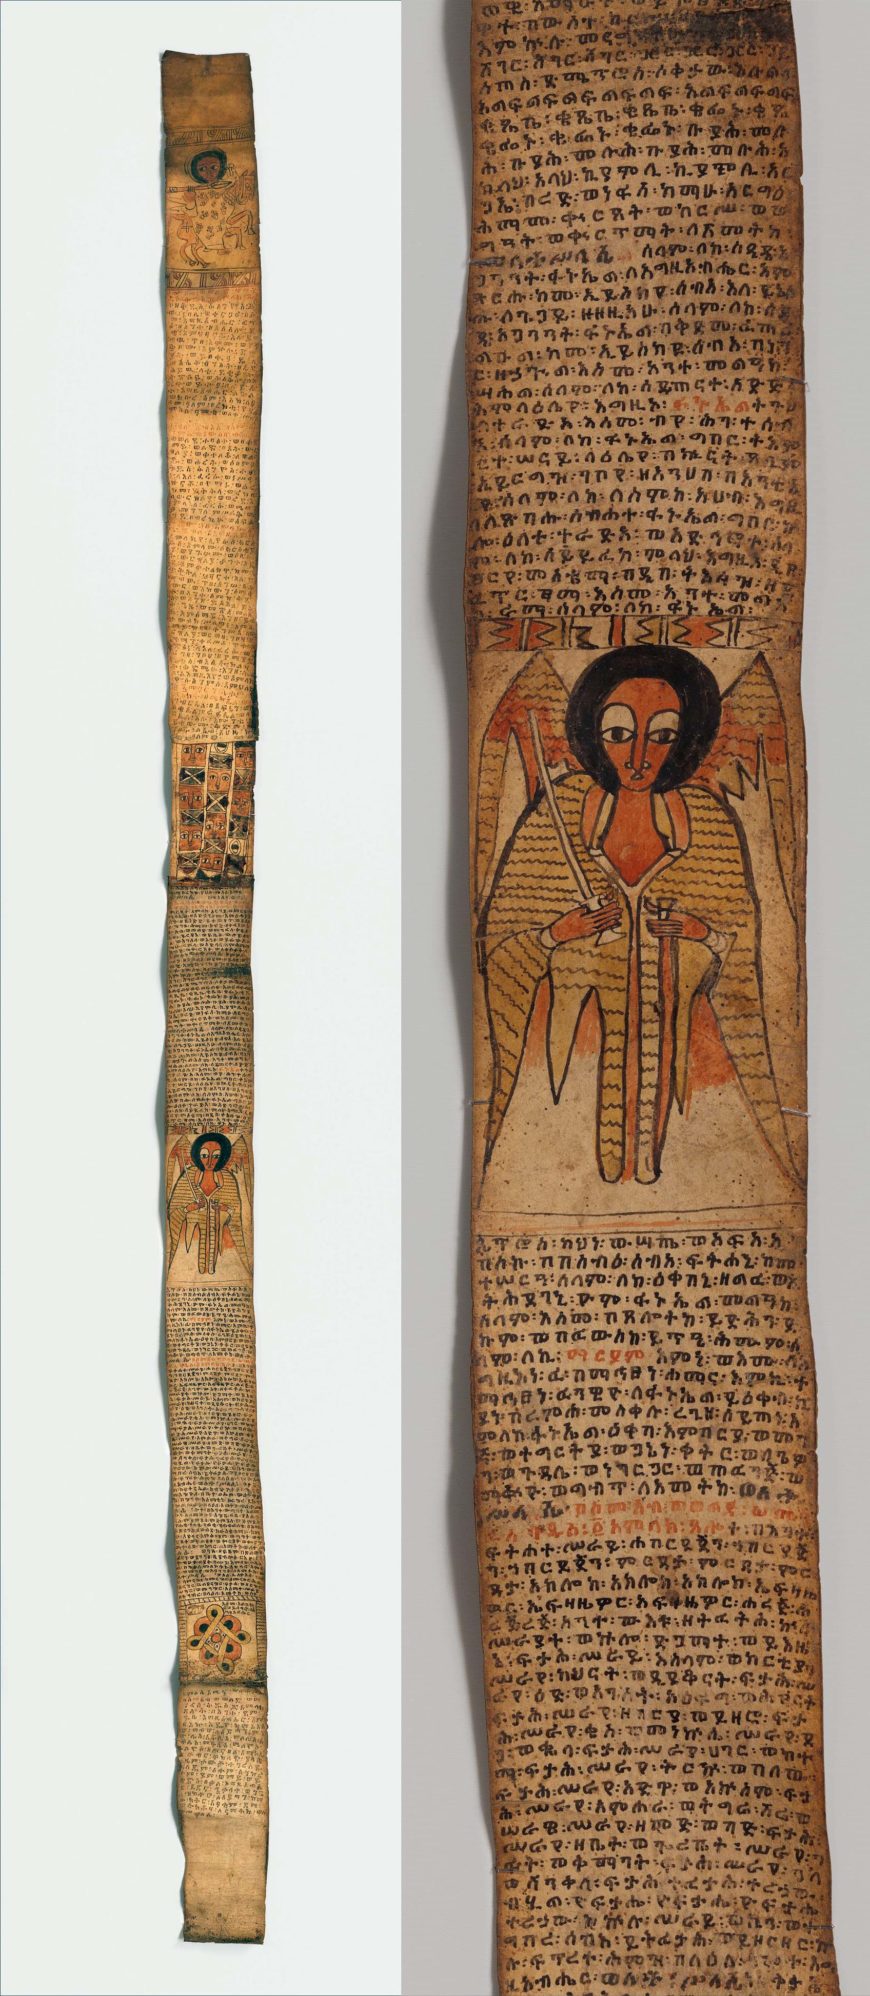 Amhara or Tigrinya peoples (Ethiopia), Healing Scroll, pigment on parchment, 19th century. 3 1/2 x 75 in. Metropolitan Museum of Art, 2011.377